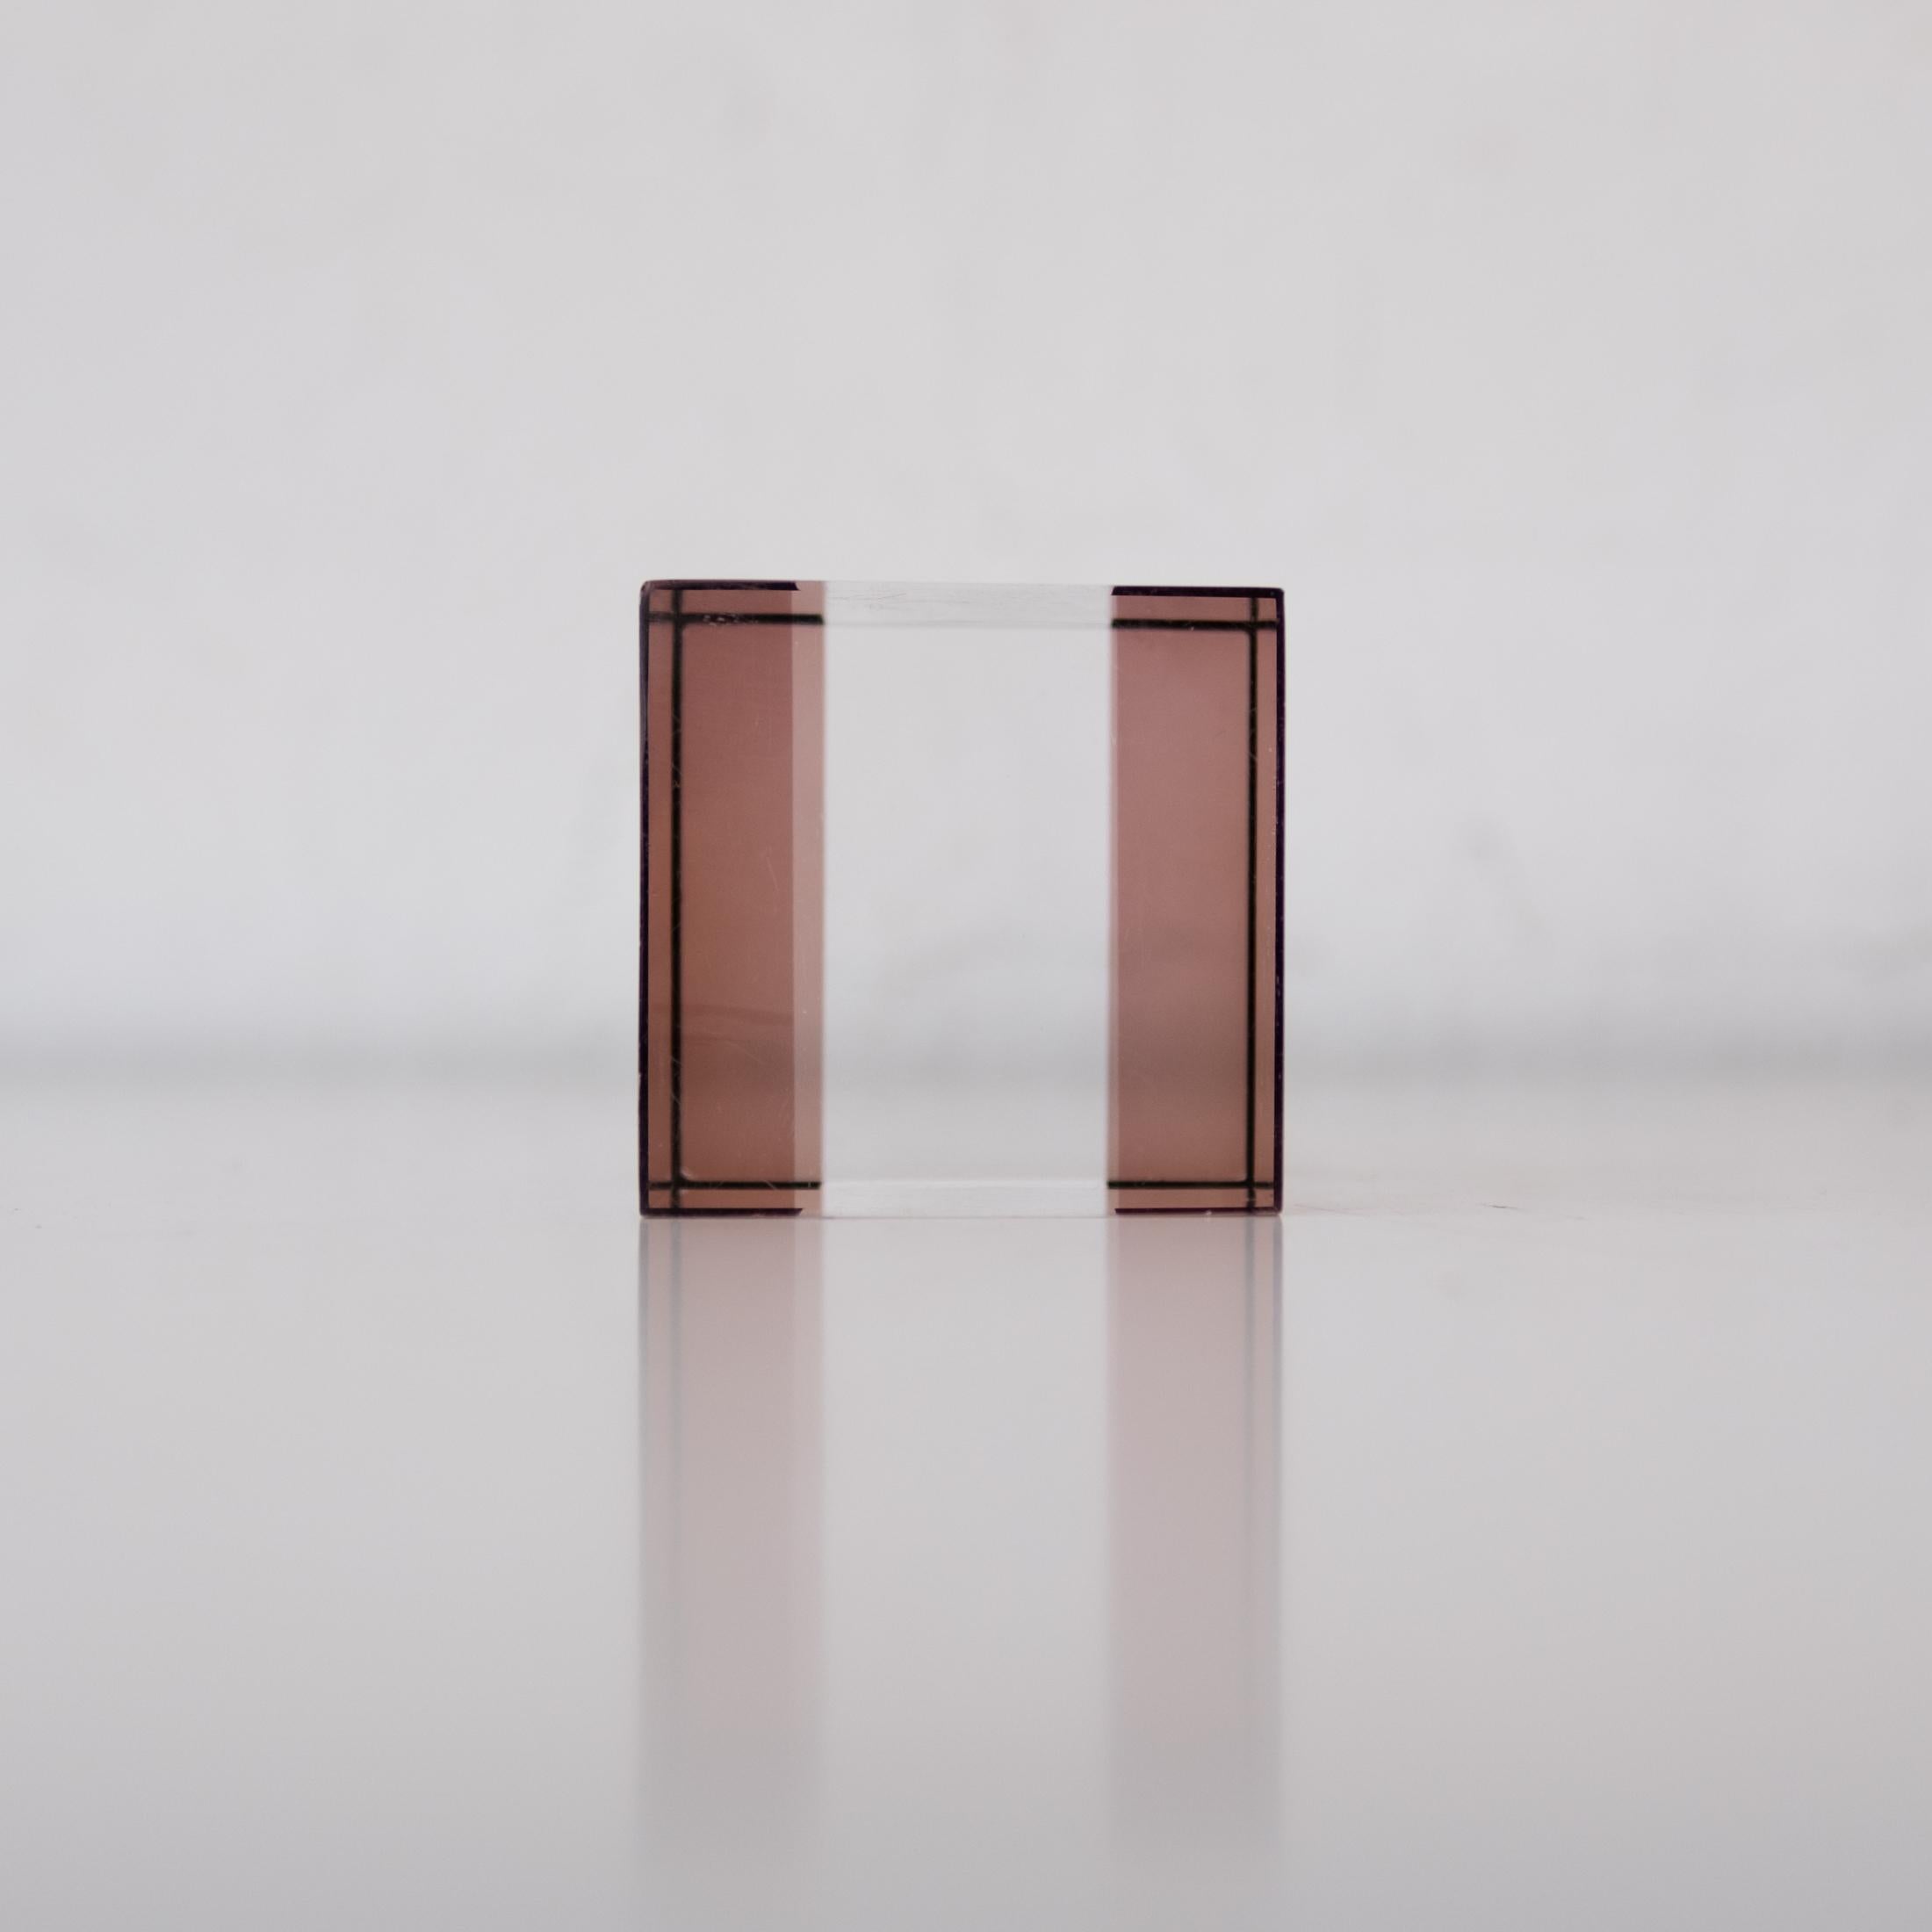 Minimalist Lucite Cube Op Art Sculpture In Good Condition For Sale In San Diego, CA